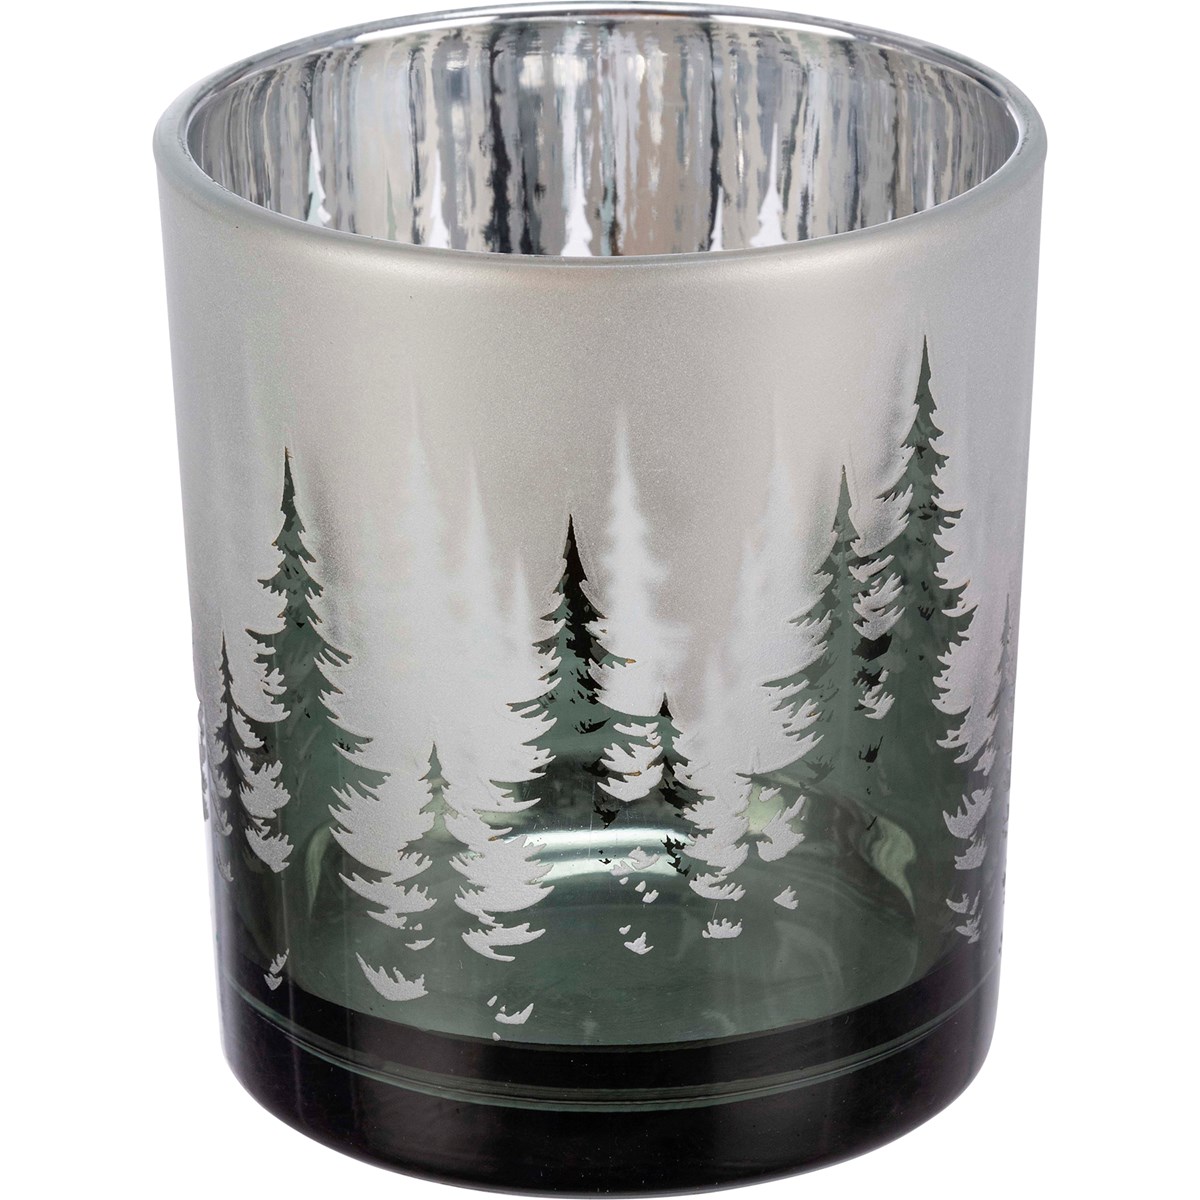 Trees Candle Holder Set - Glass